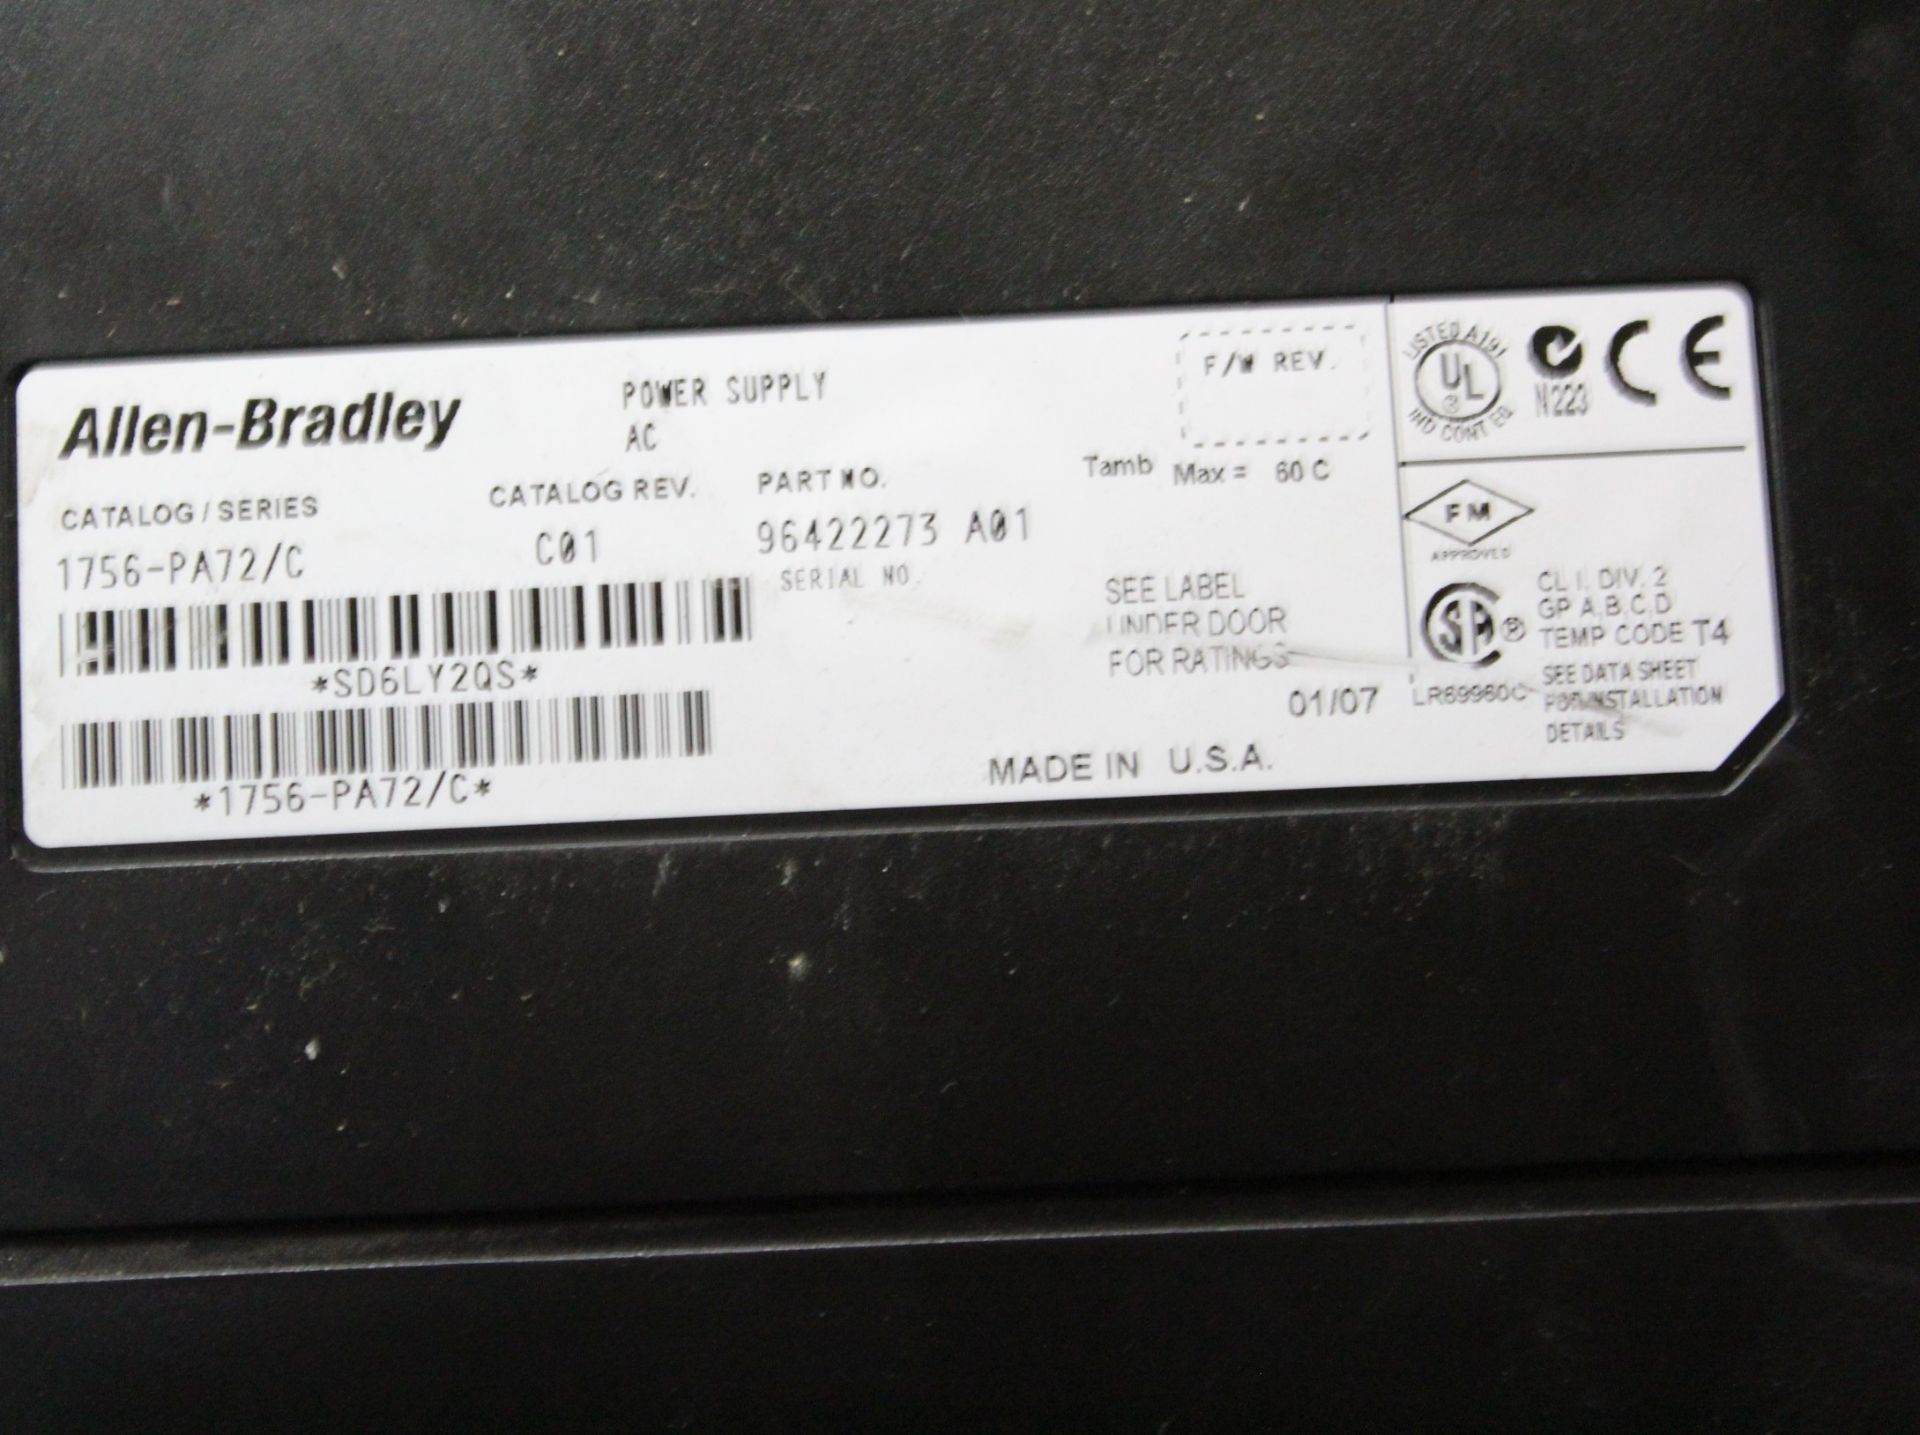 ALLEN BRADLEY 17 SLOT CONTROL LOGIX PLC RACK CHASSIS WITH POWER SUPPLY - Image 6 of 7